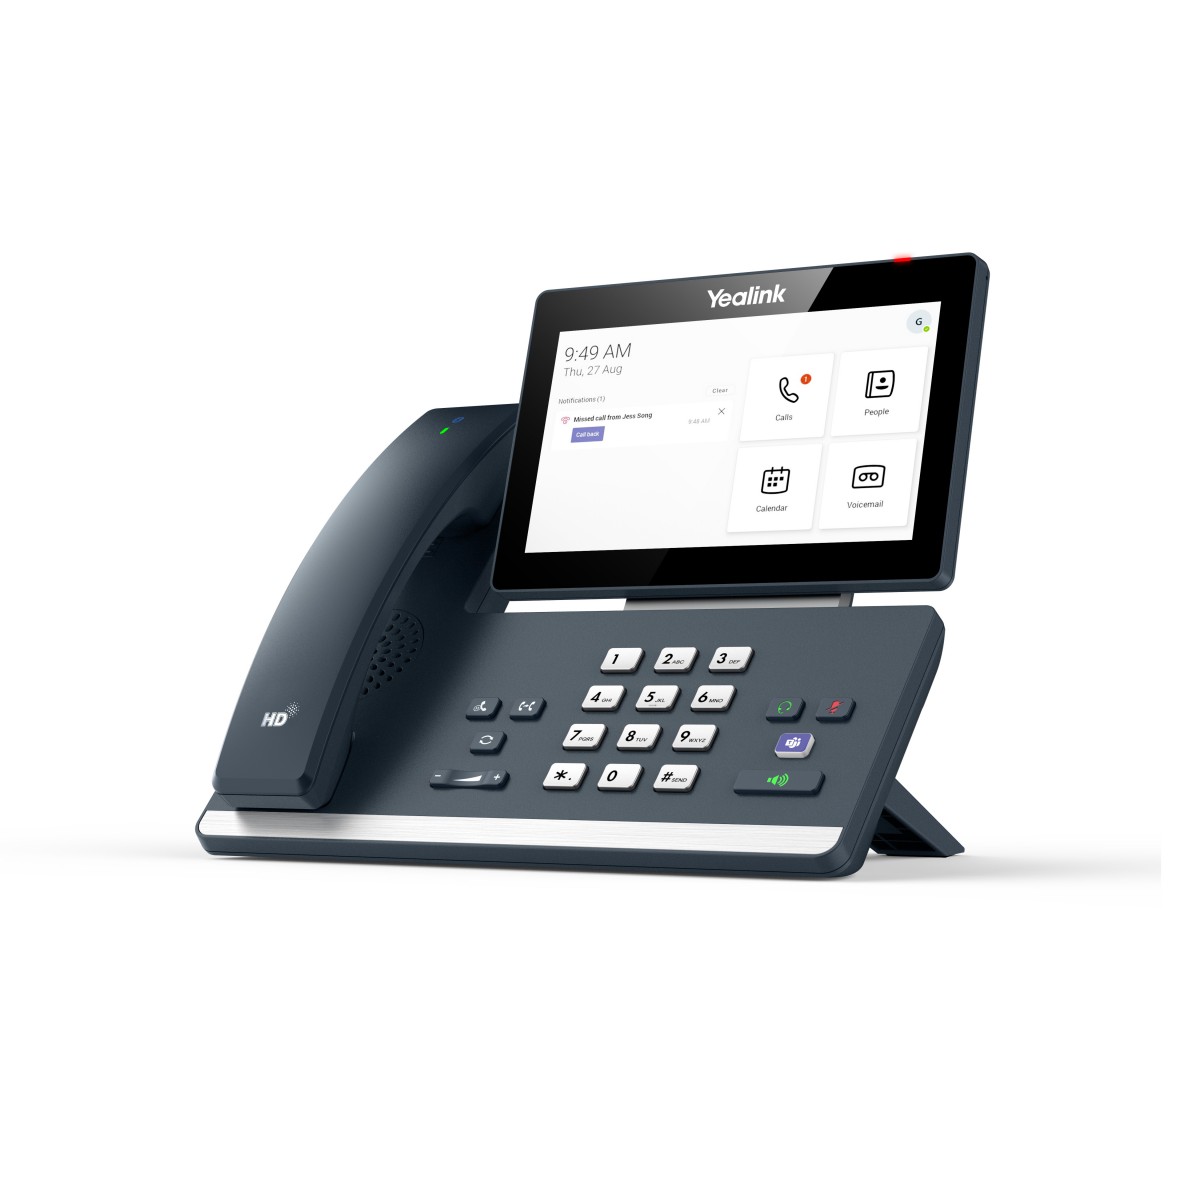 Yealink Teams Edition MP58-WH - VoIP-Telefon - Voice-Over-IP